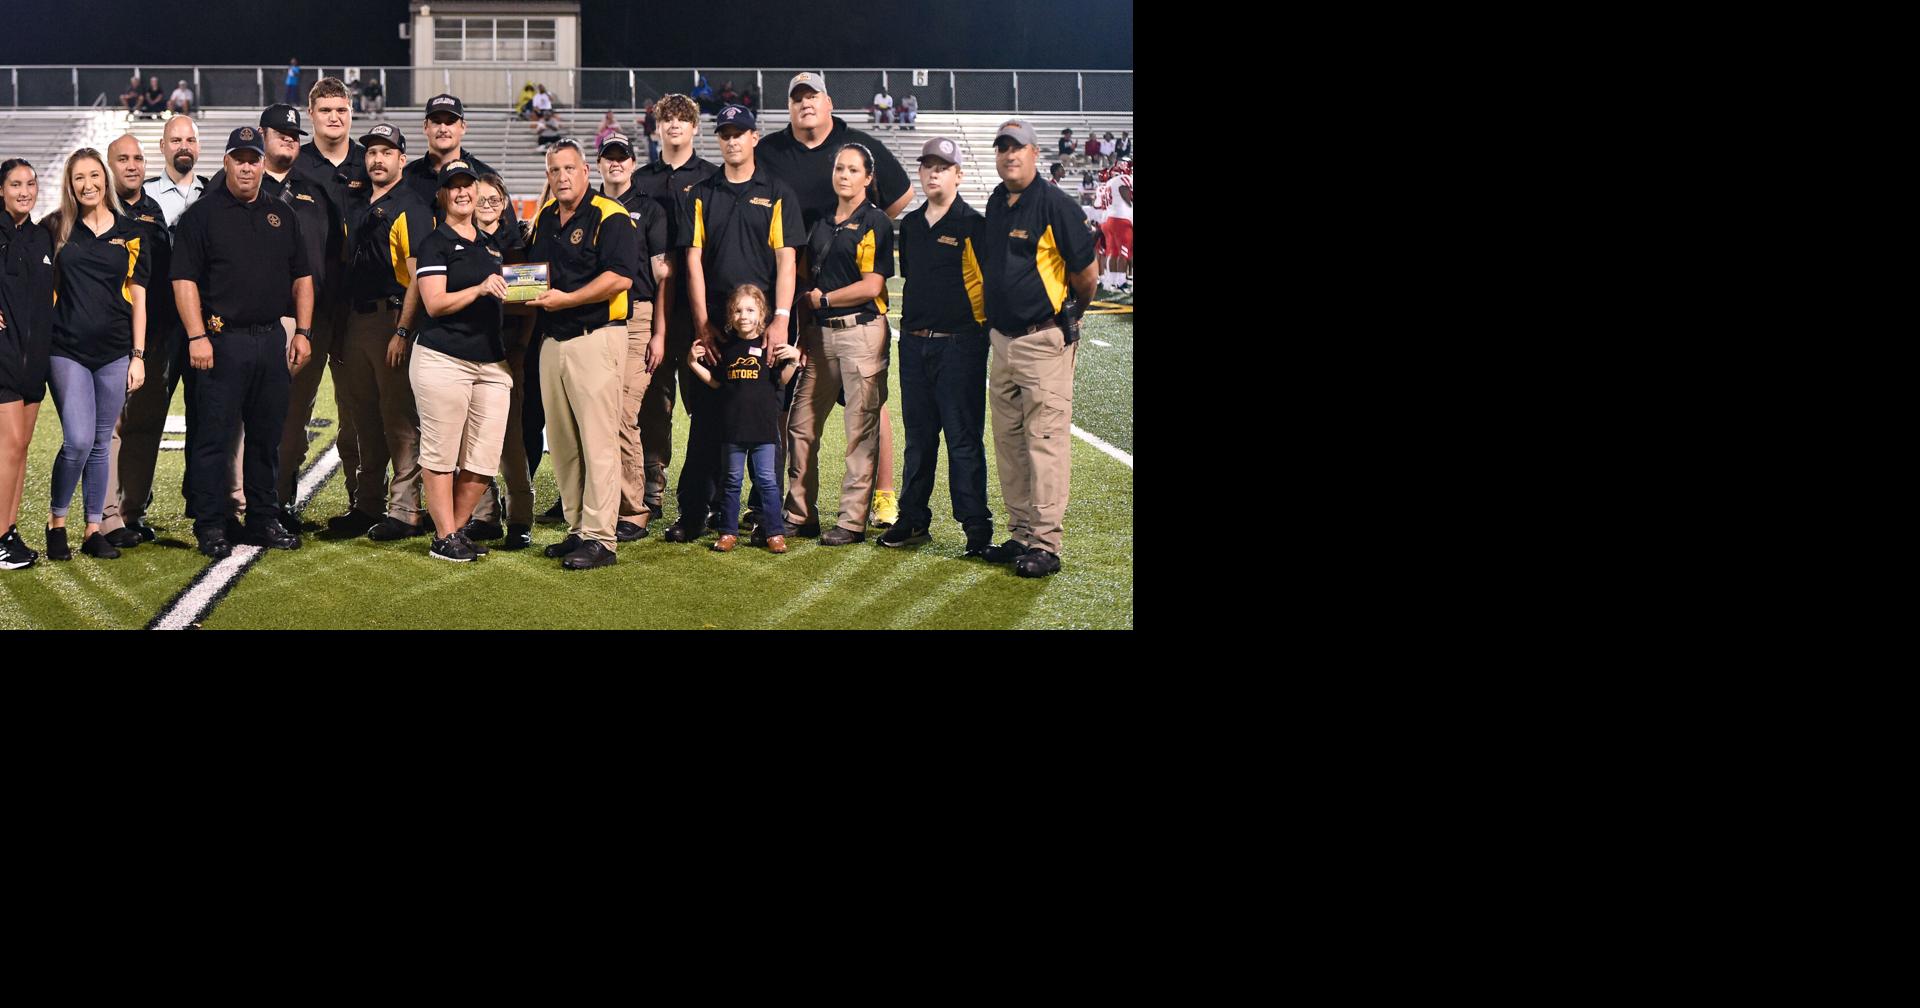 St. Amant High names honorary team captains during ceremonies at football games